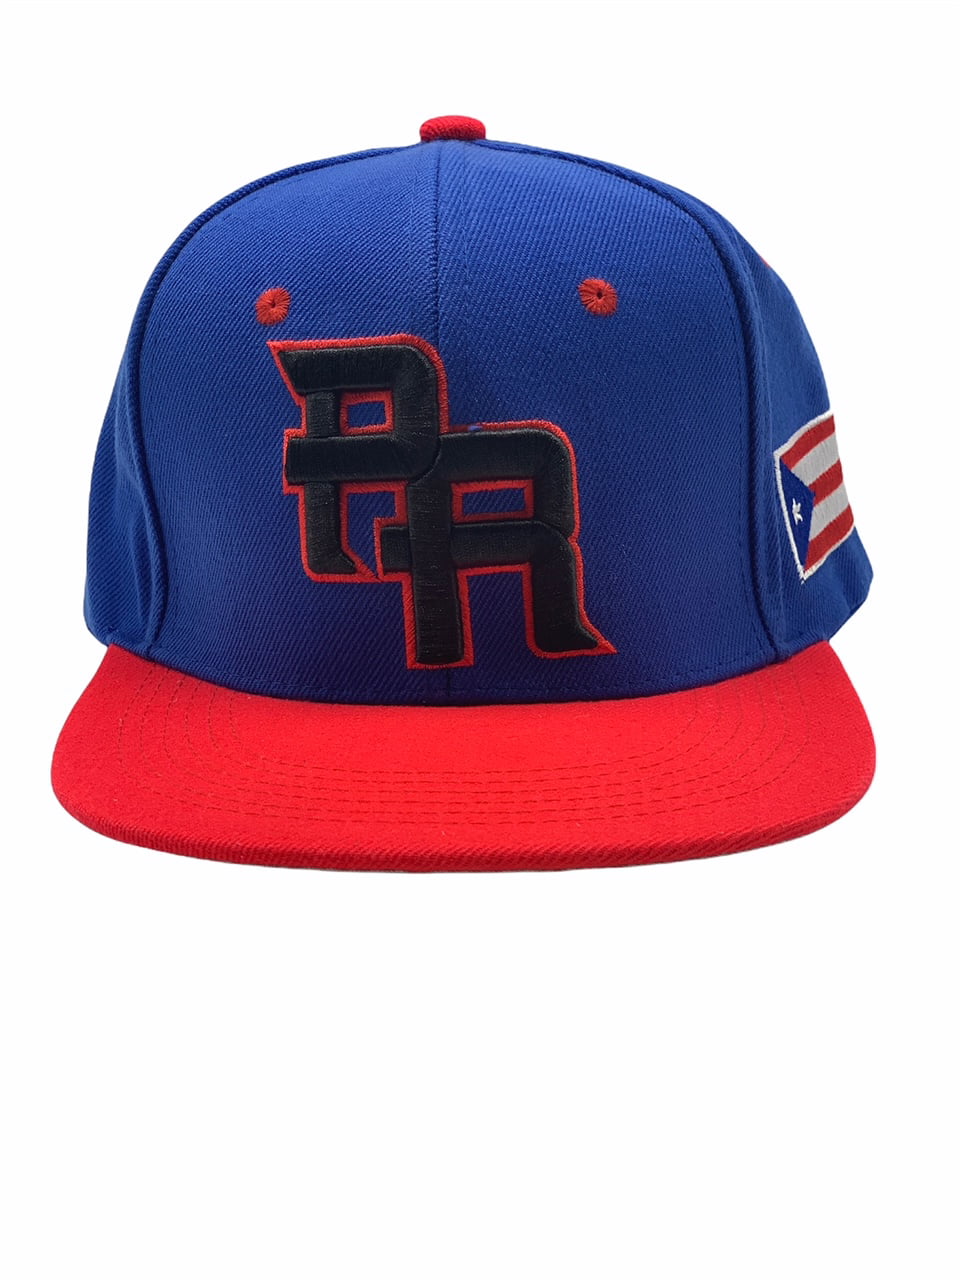 SIDE  FLAT BILL. NEW PUERTO RICO PR 3-D EMBROIDERED SNAPBACK CAPS FRONT,BACK